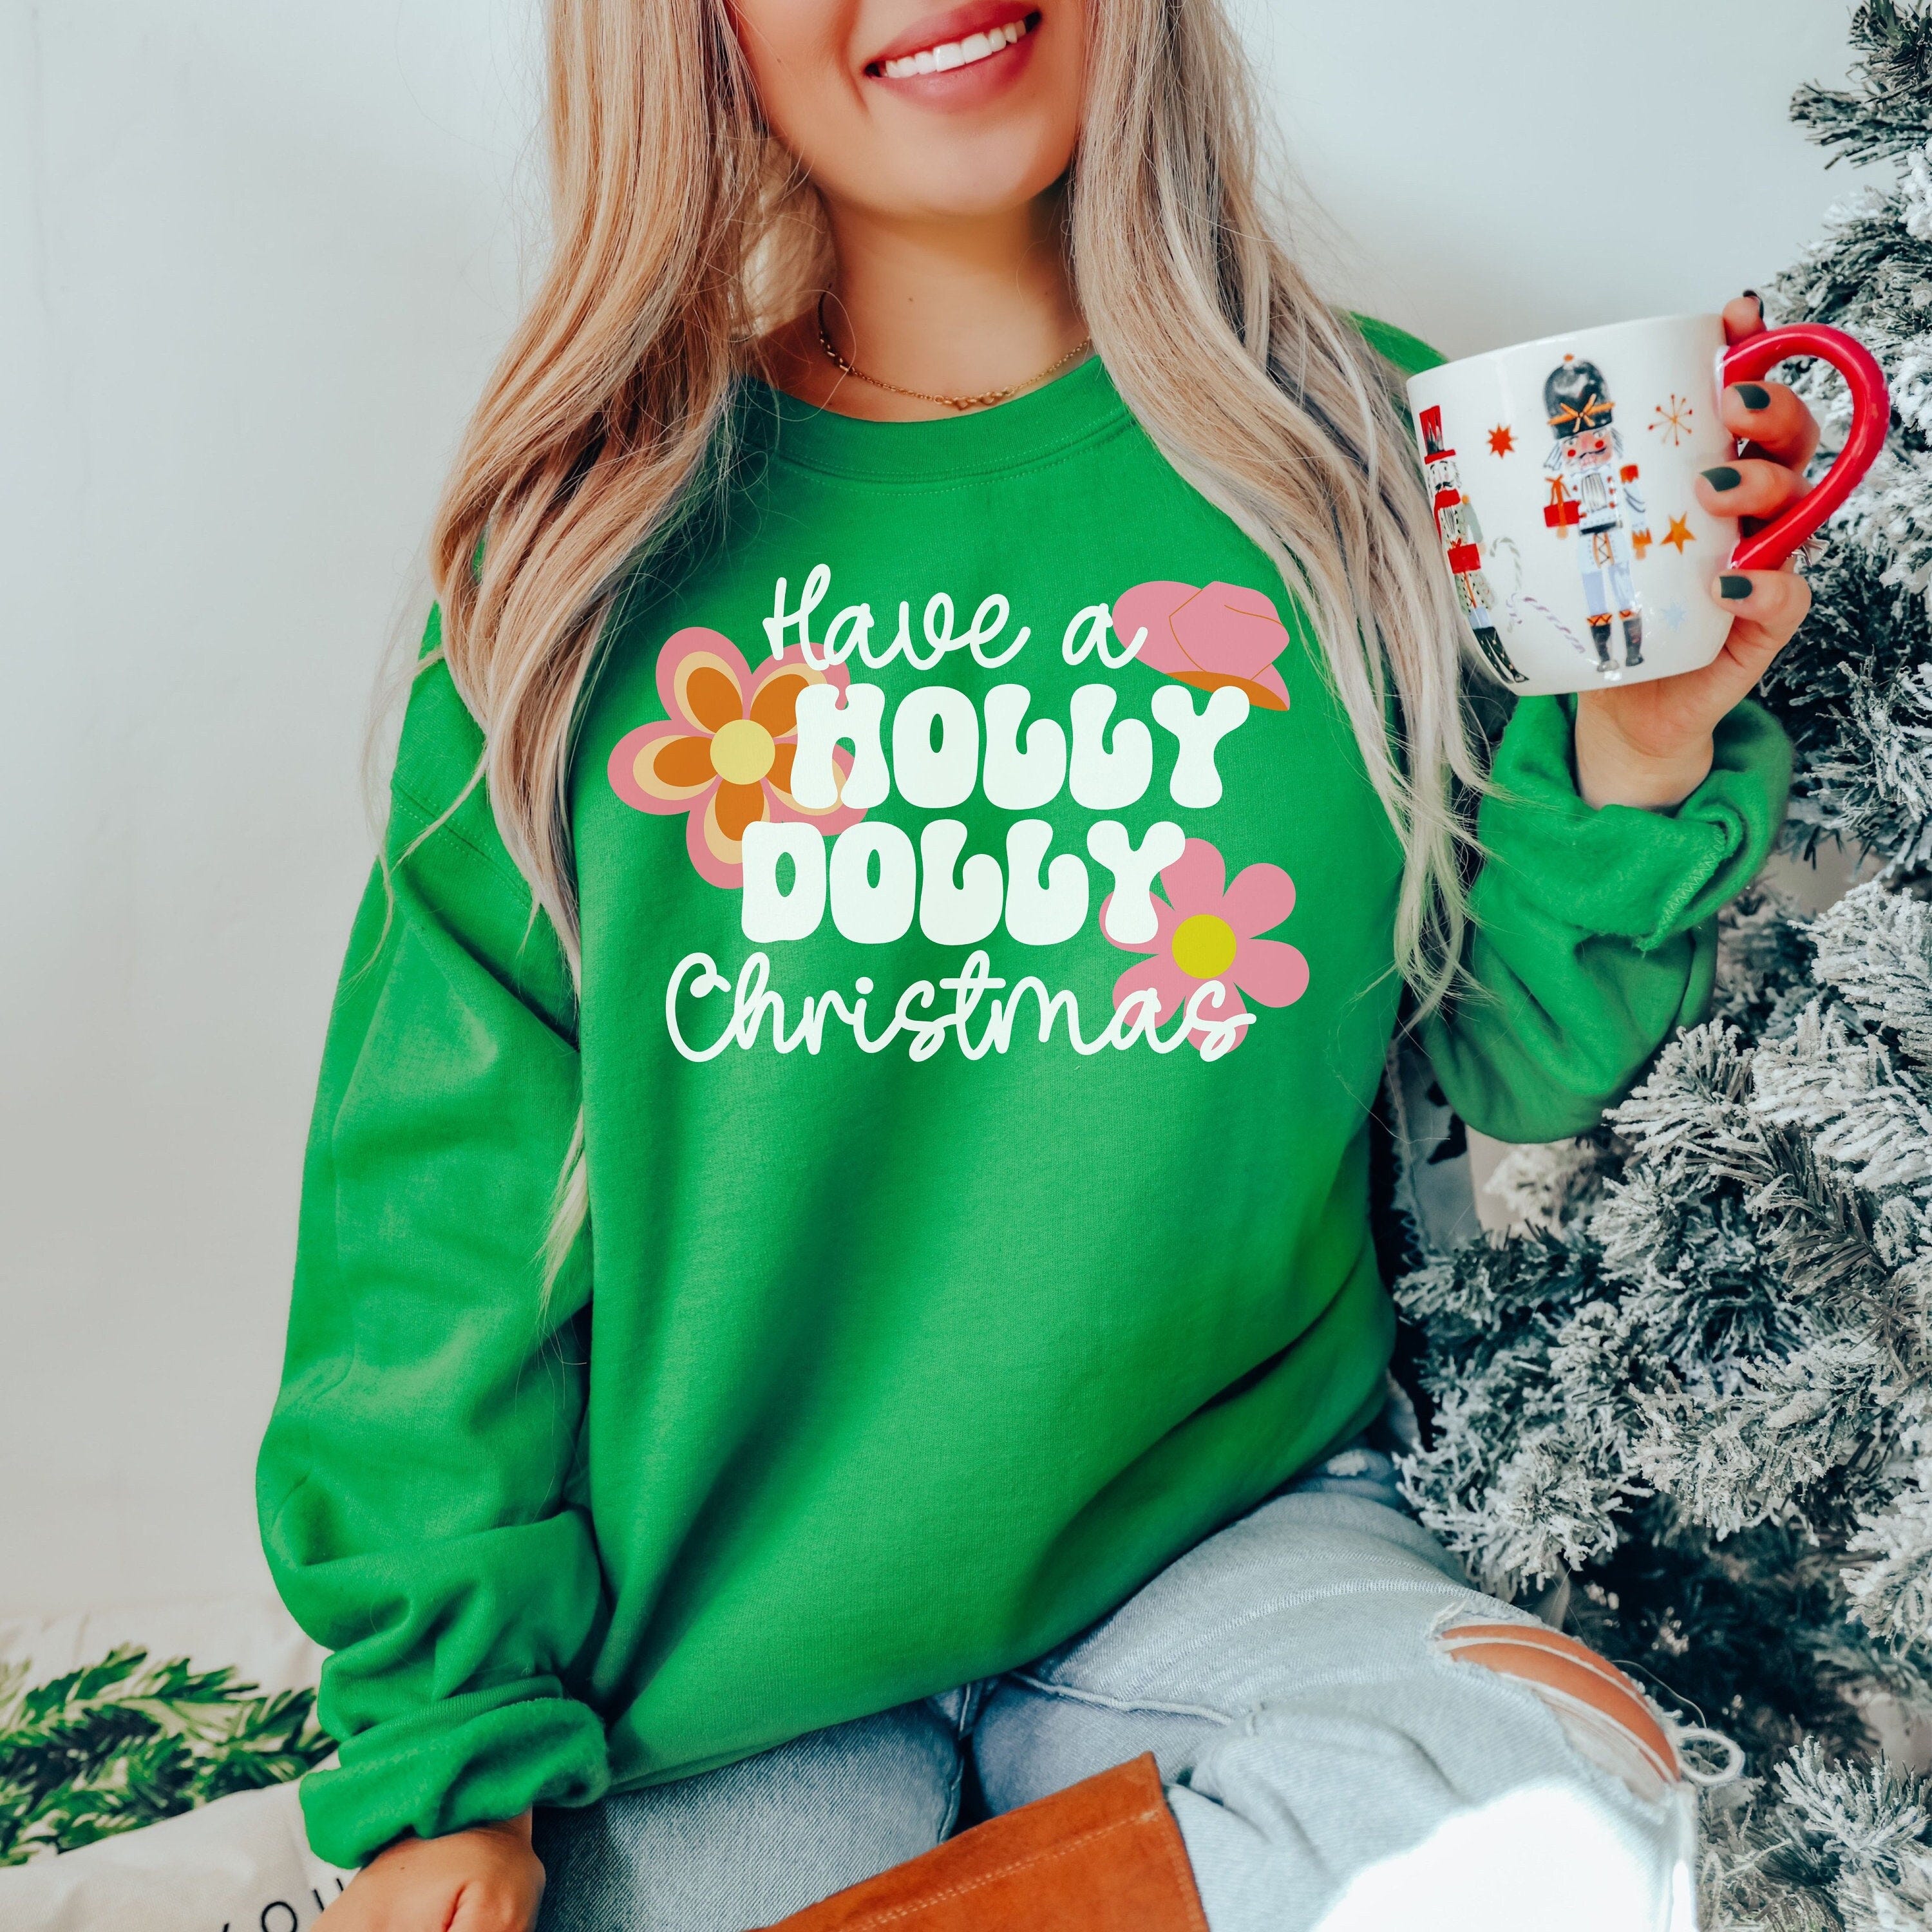 Have A Holly Dolly Christmas Sweater, Holly Dolly Christmas, Cowgirl Christmas Sweater, Dolly Shirt, Christmas Crewneck, Holly Dolly Gift